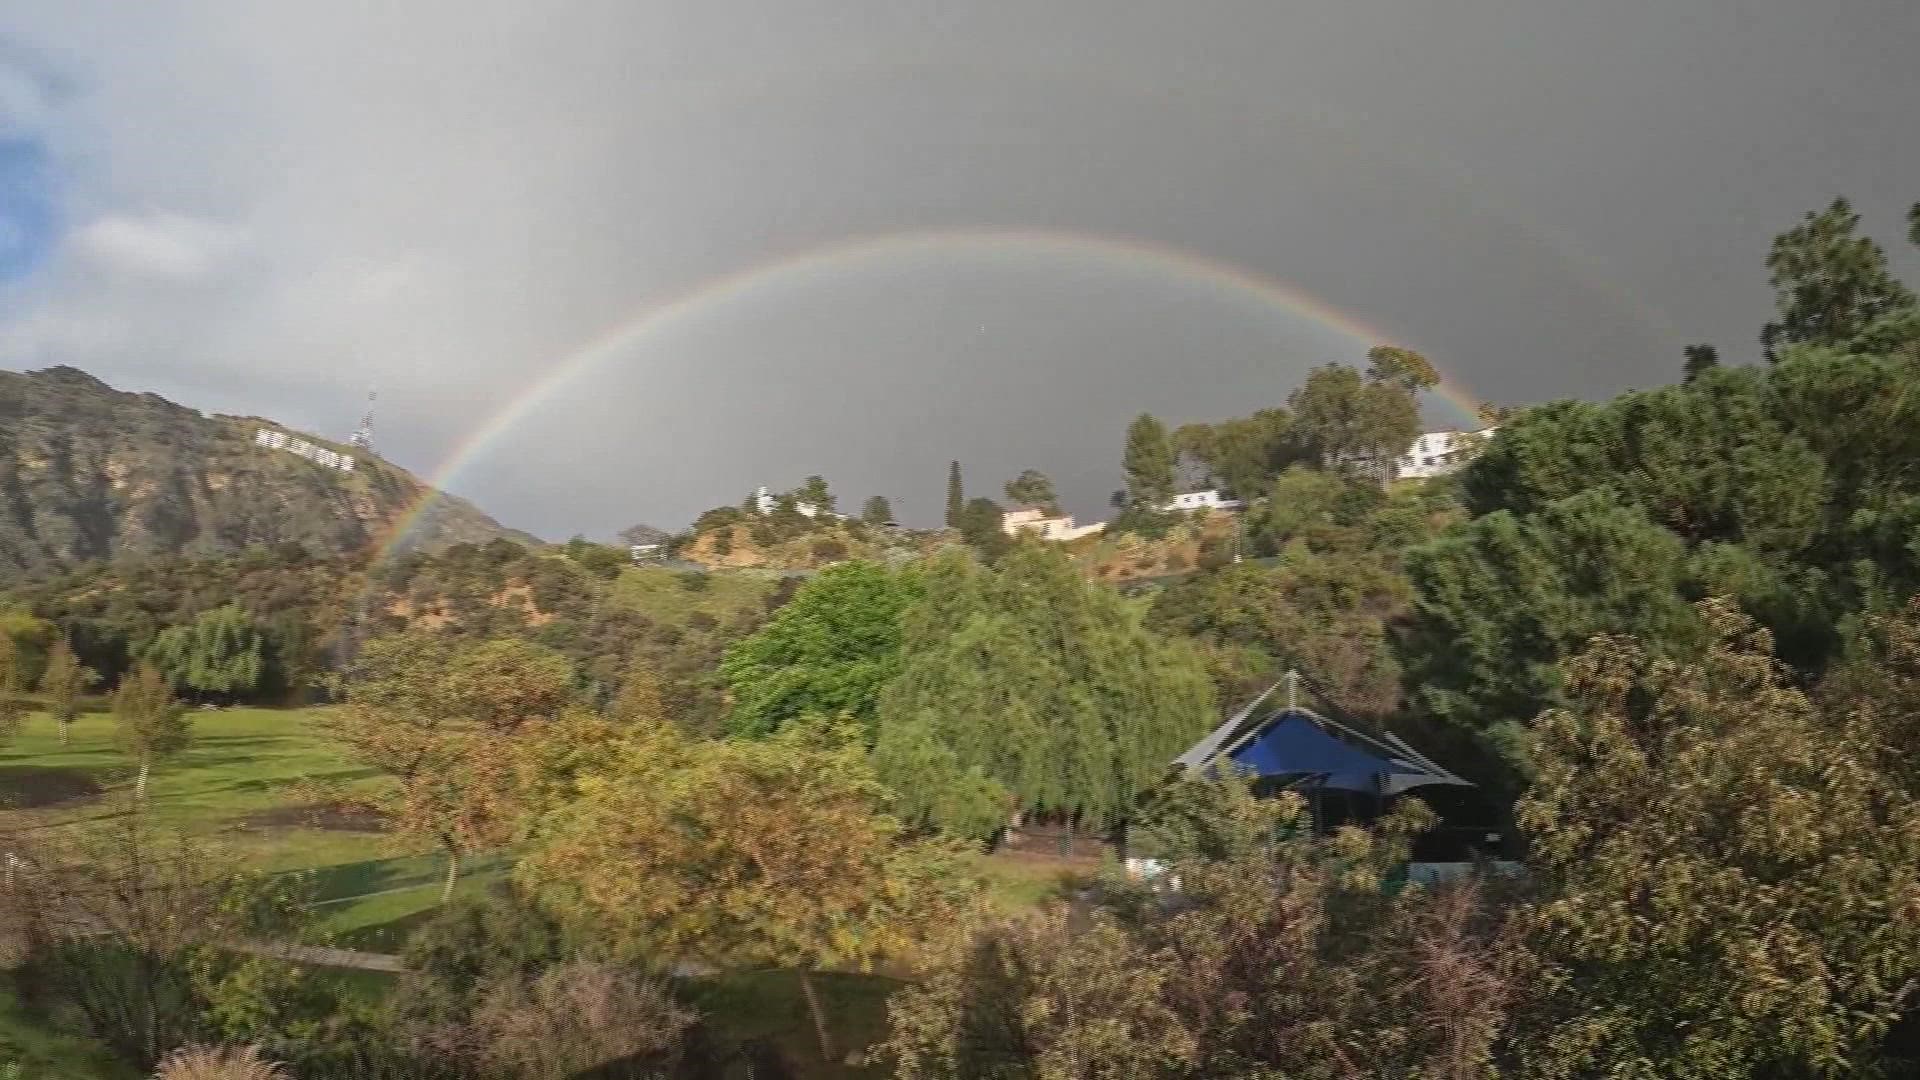 Thursday's winter blast in the Los Angeles area eventually gave way to a magical moment, as a double rainbow stretched across the sky near the famed "Hollywood" sign